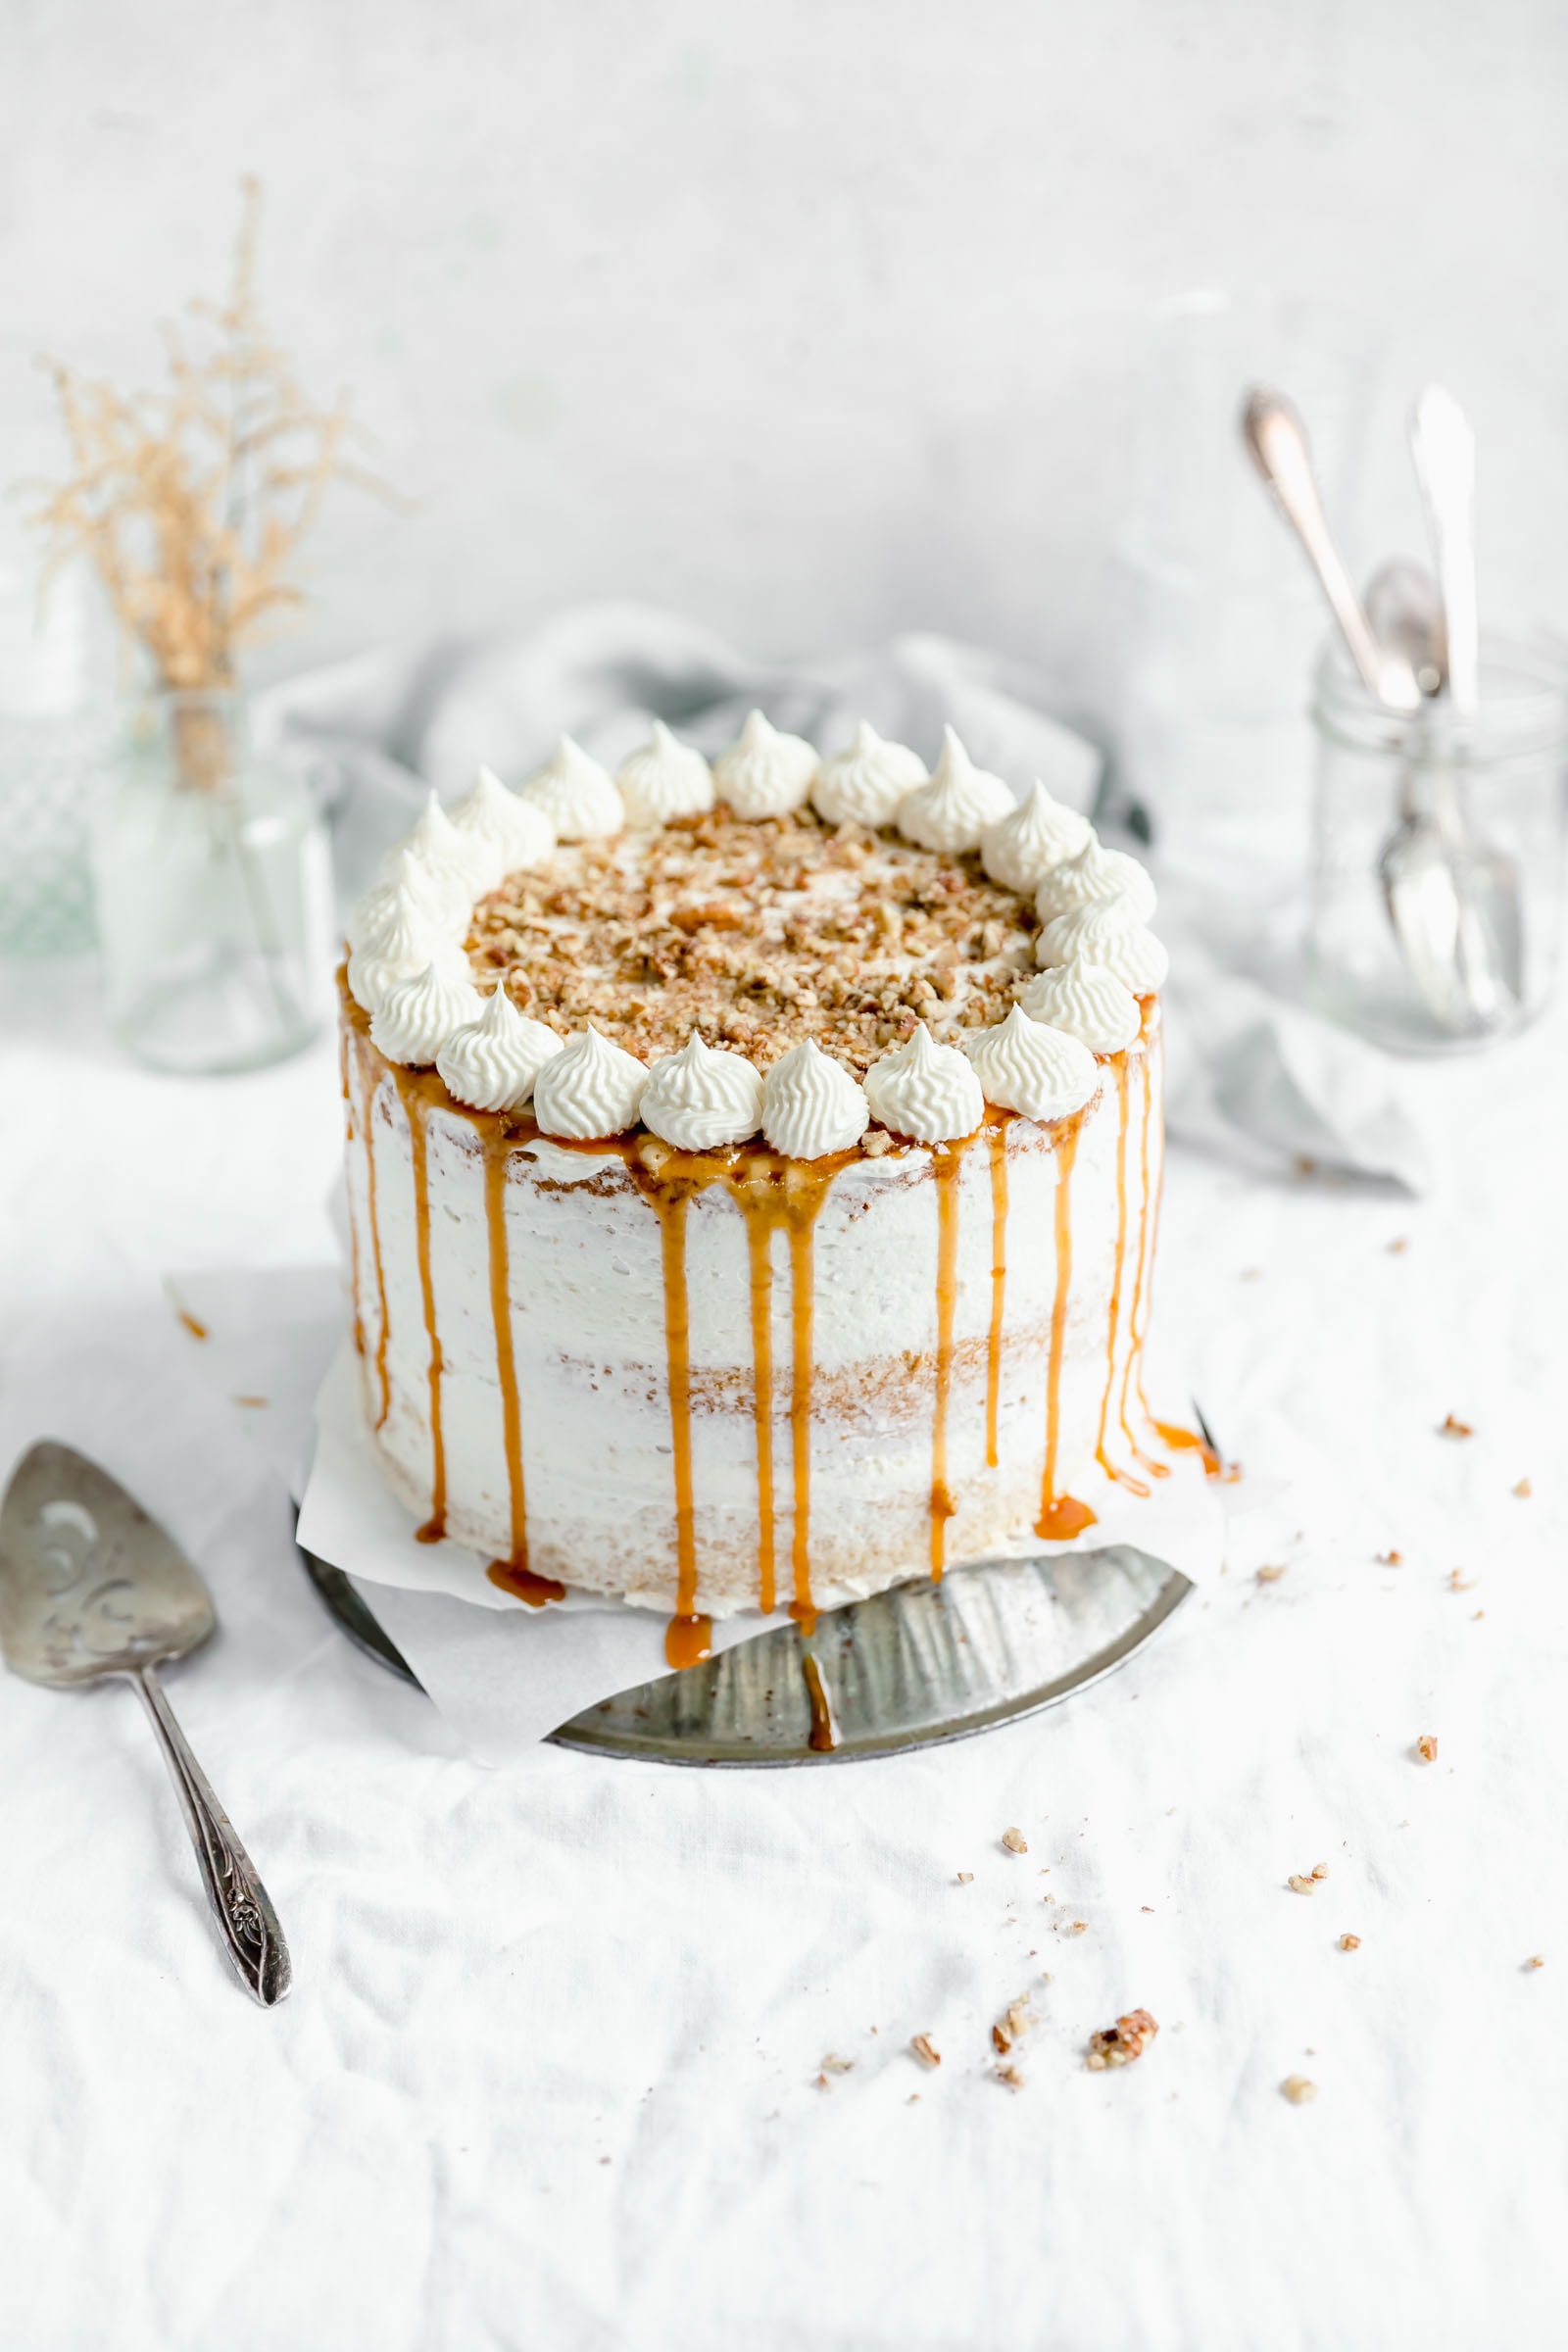 This decadent praline layer cake is the perfect centerpiece for all your Fall celebrations! Made with a moist and tender vanilla cake sandwiched together with a gooey homemade praline feeling and frosted with fluffy buttercream. Um YES. #bromabakery #pralinelayercake #foodphotography